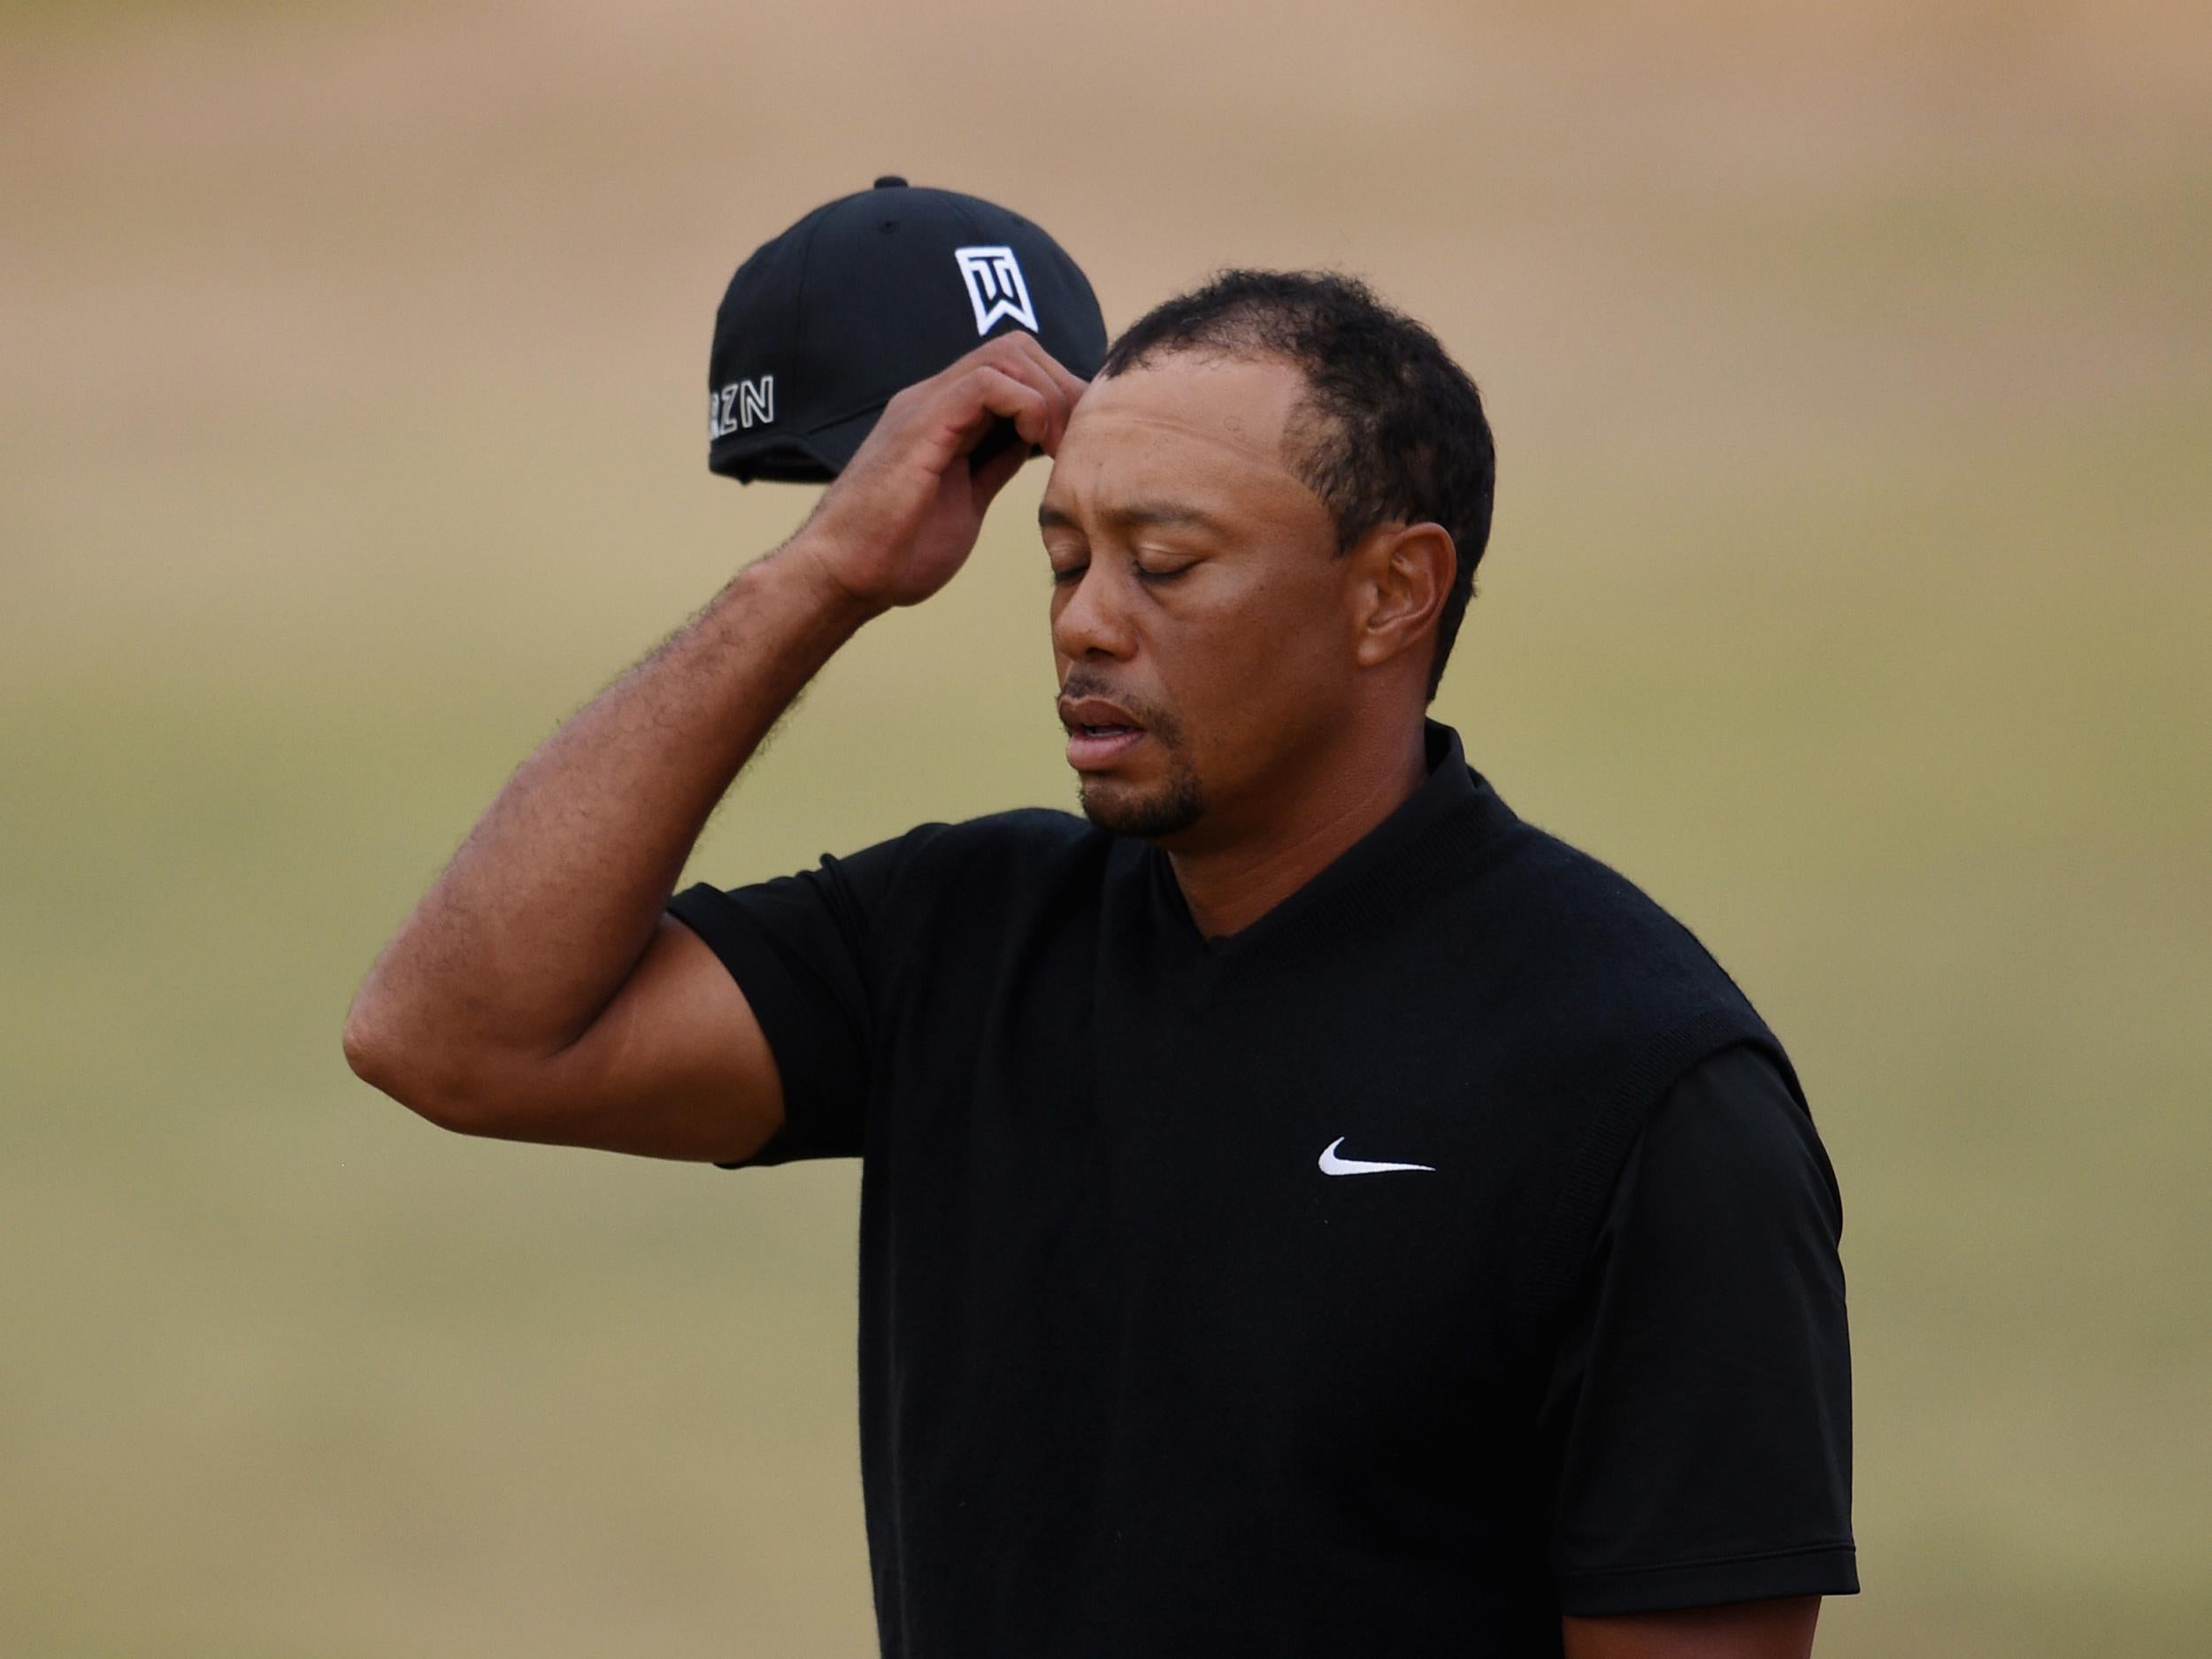 Woods will undergo his third back operation in less than 19 months